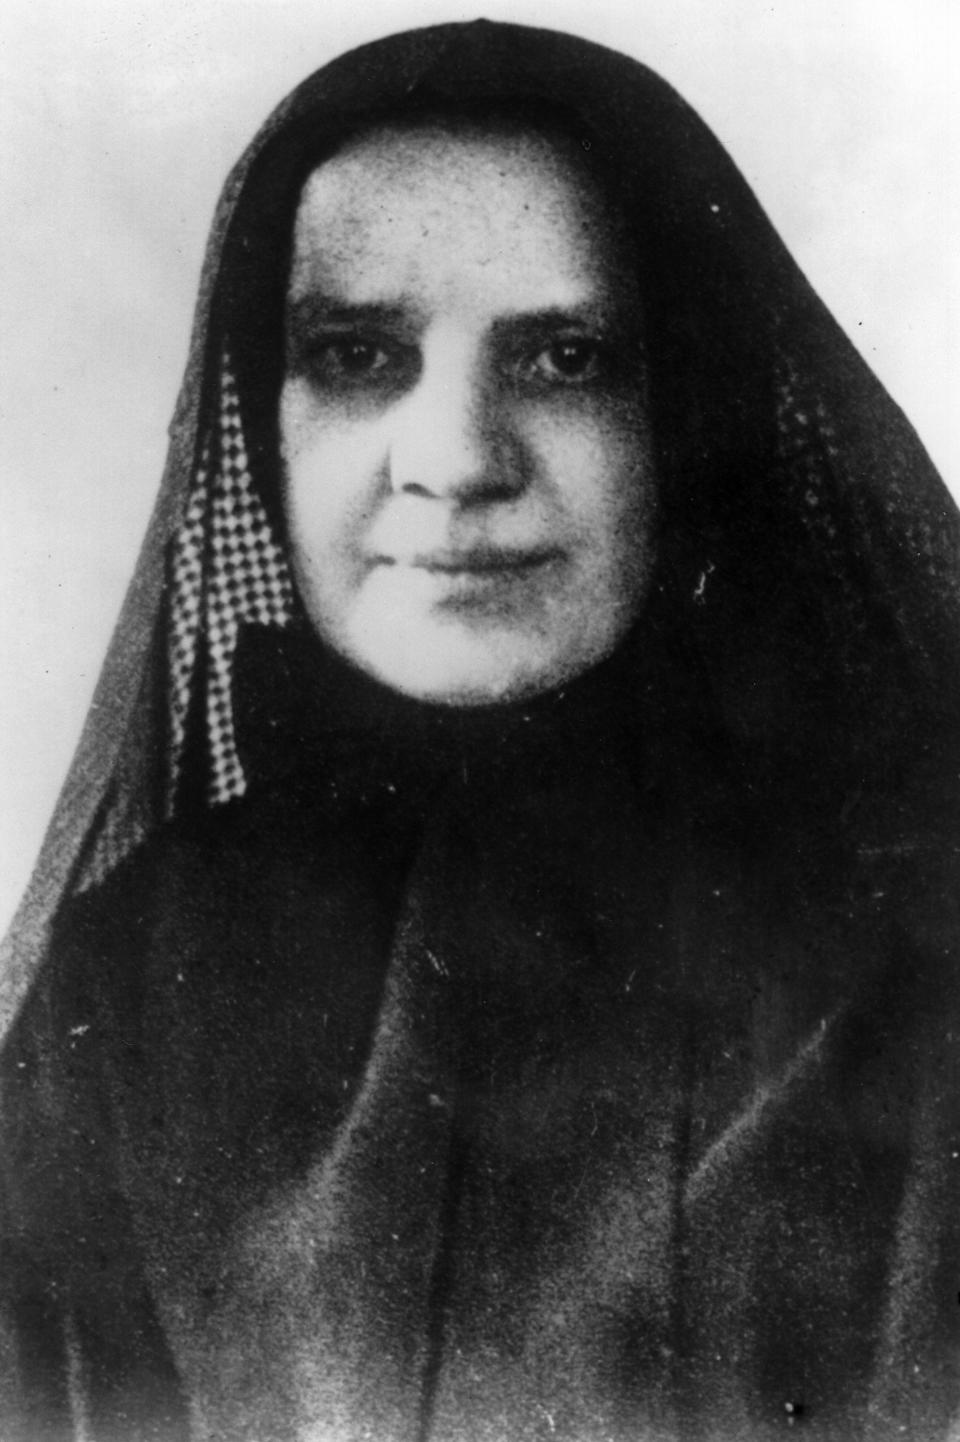 American nun and founder of the Missionary Sisters of the Sacred Heart Francesca Xavier Cabrini (1850 - 1917). She was canonized in 1946.